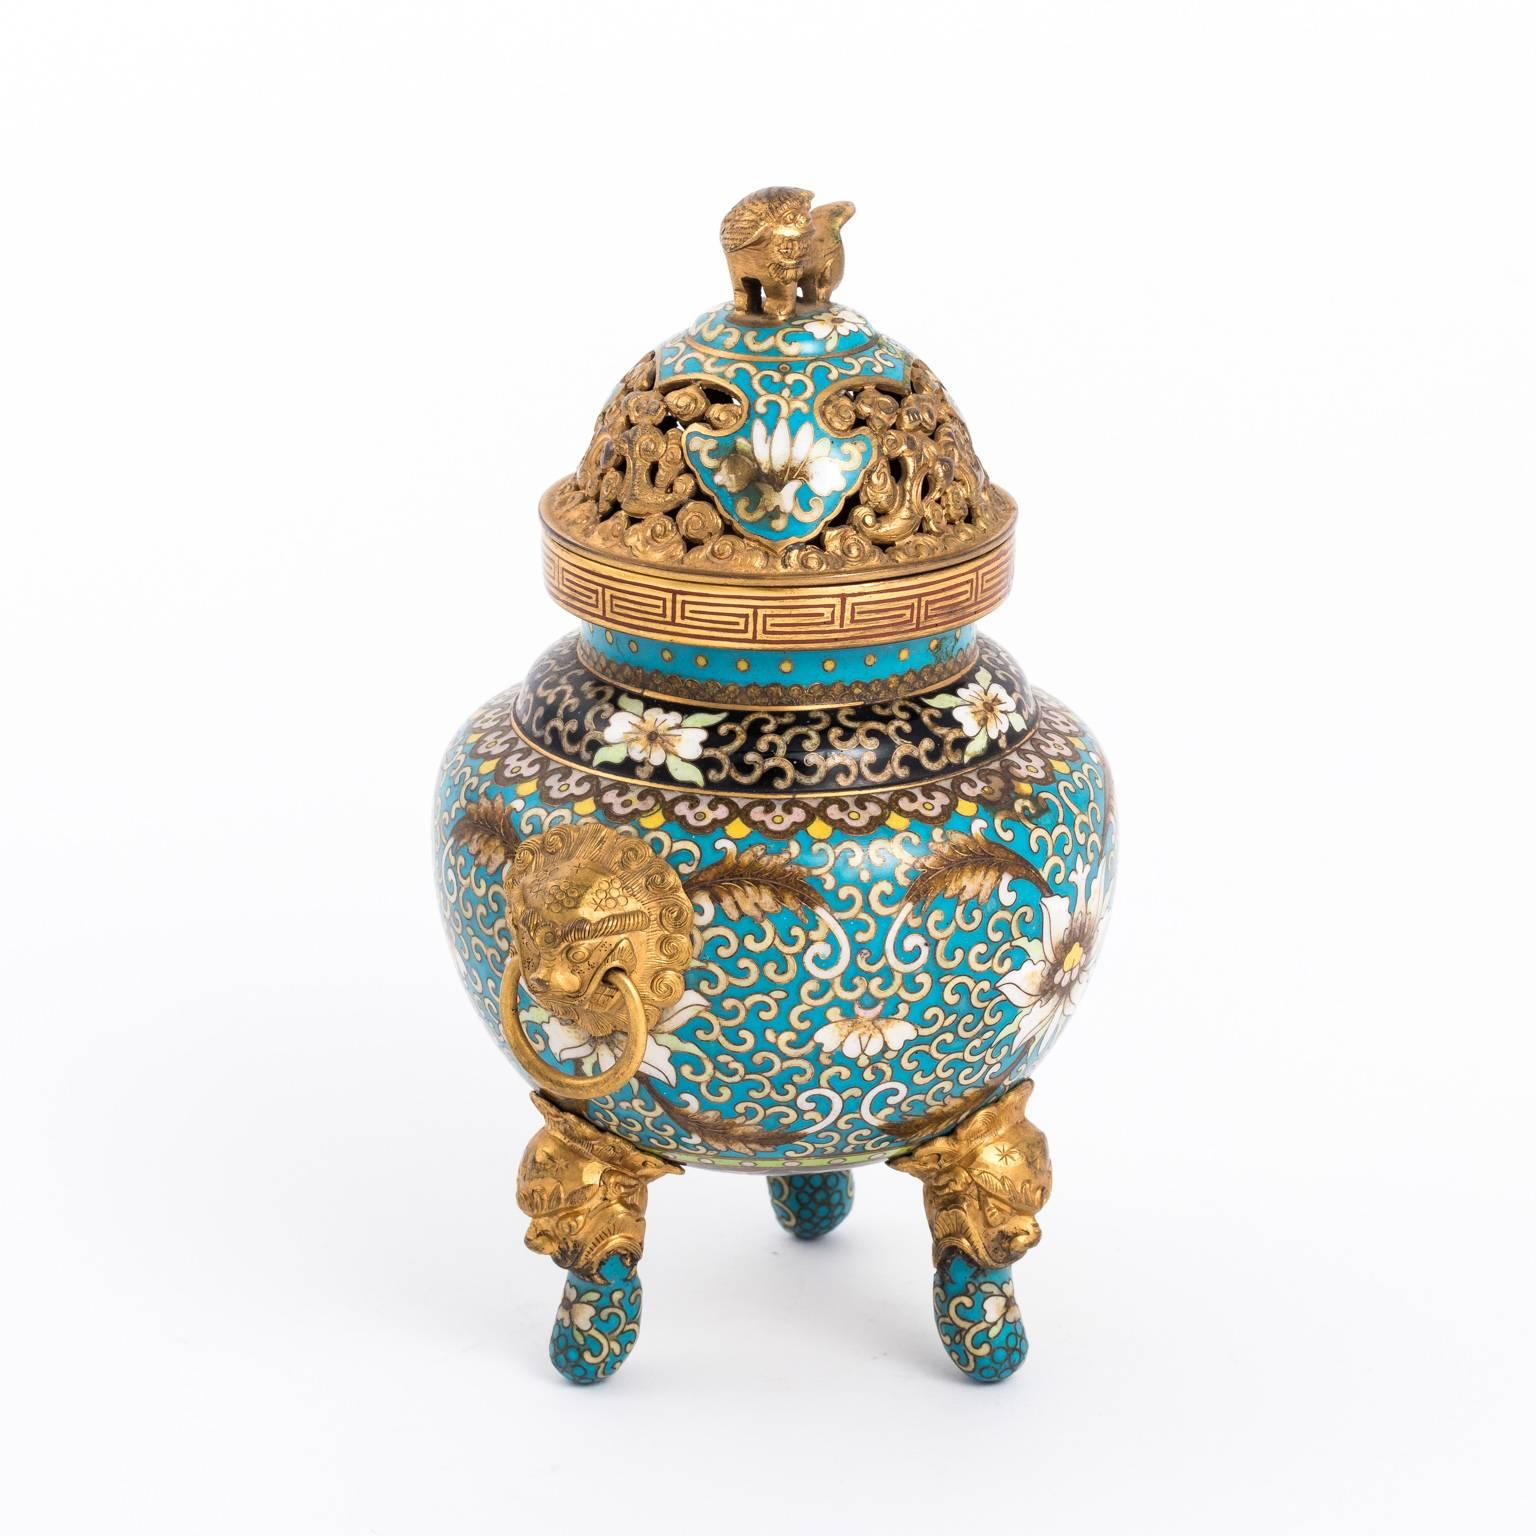 Chinese cloisonné censer for storing incense that is detailed with lotus flowers and brass dogs, circa early 20th century.